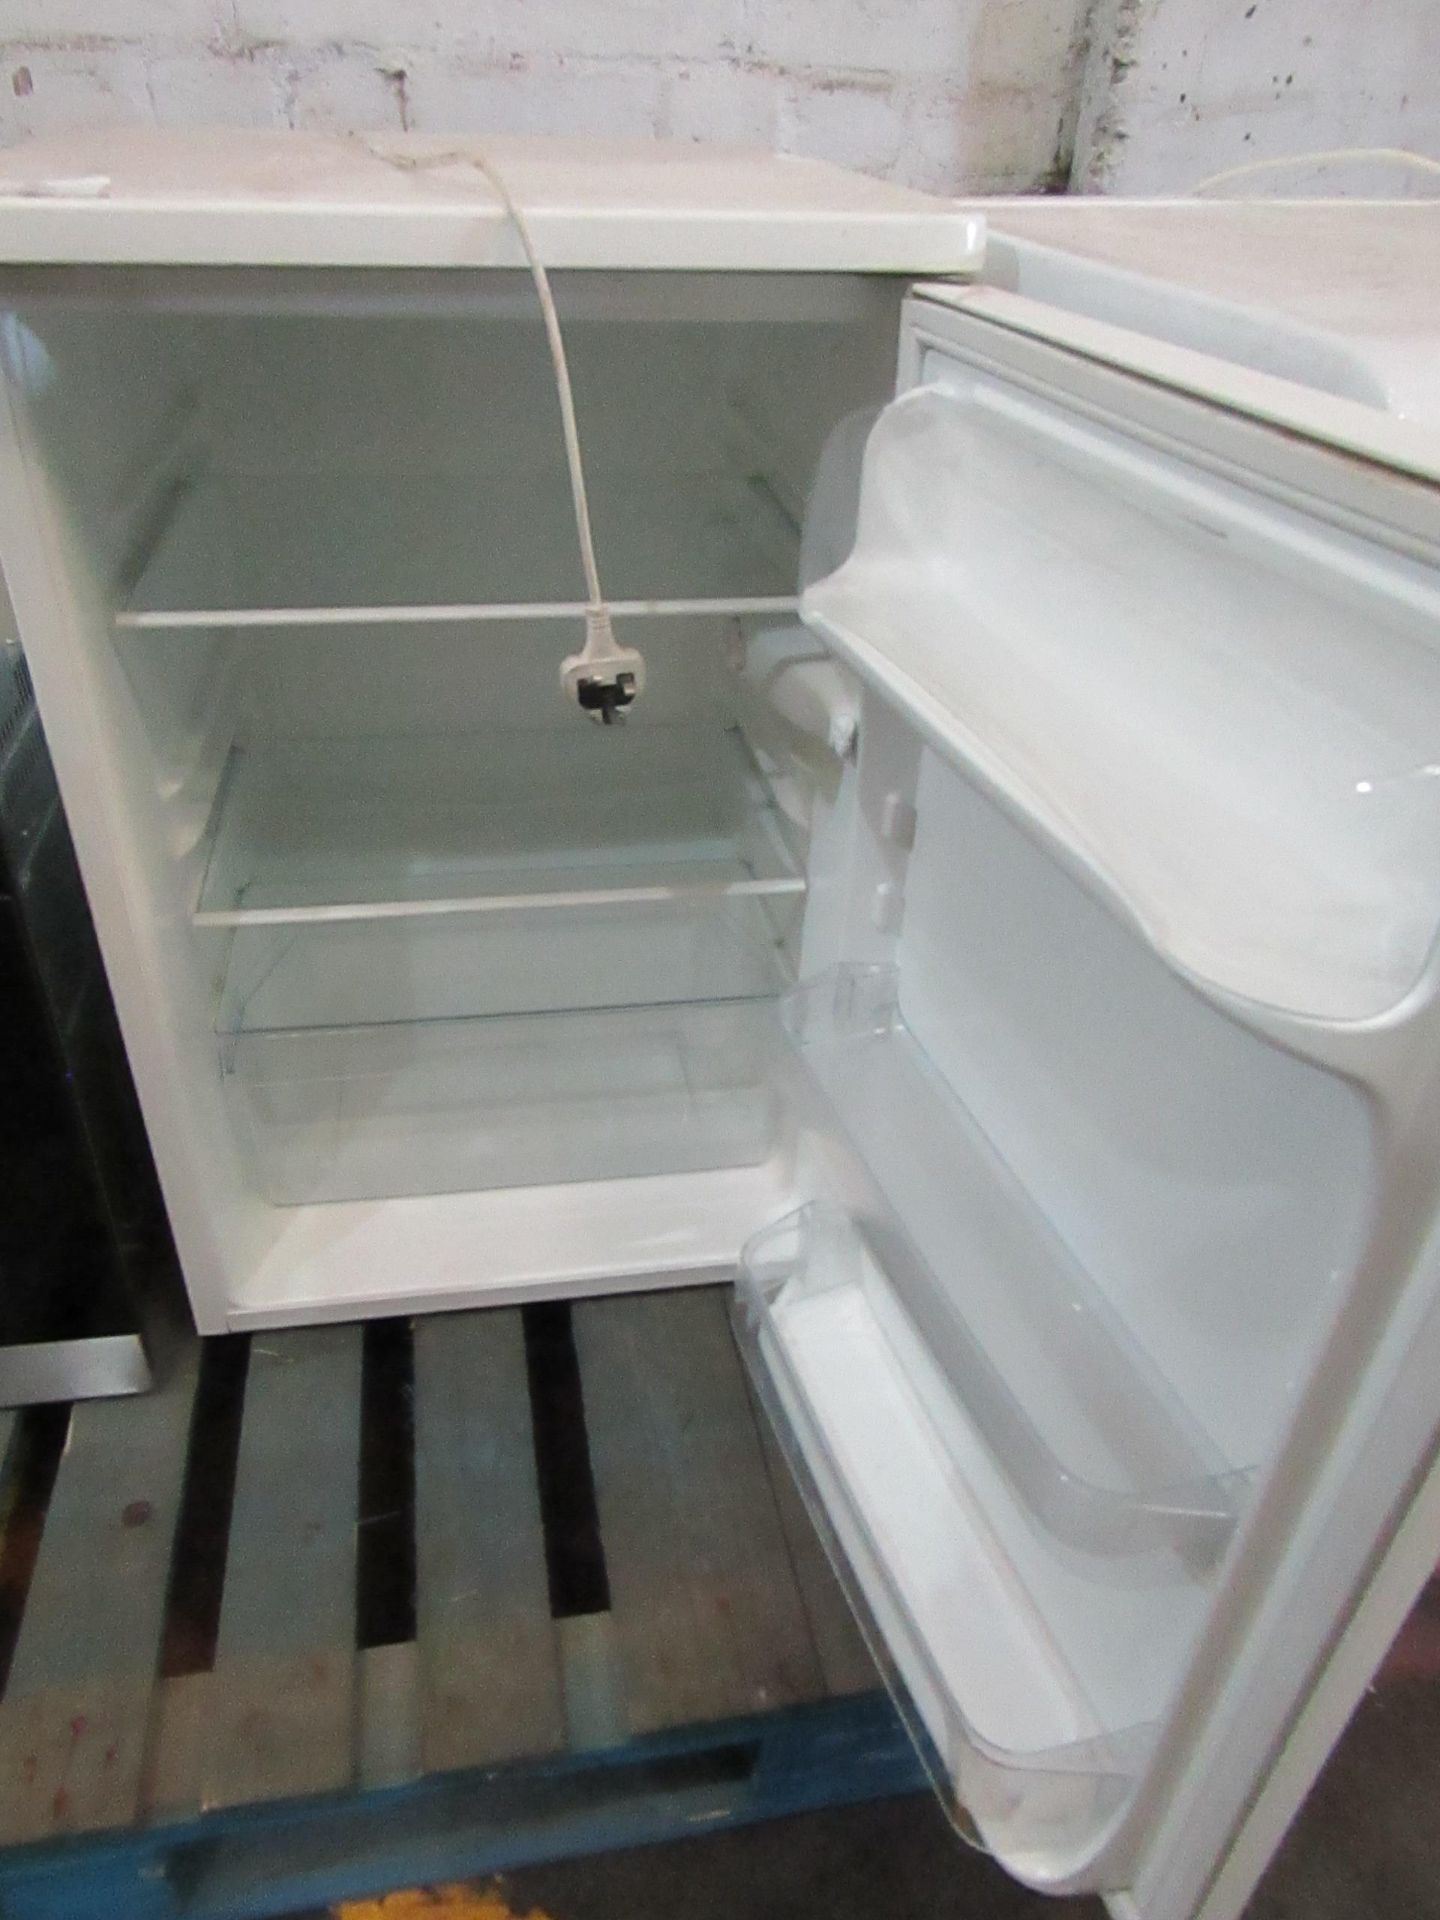 Zanussi - UnderCounter Free-Standing Fridge - Item Tested Working For Coldness. - Image 2 of 2